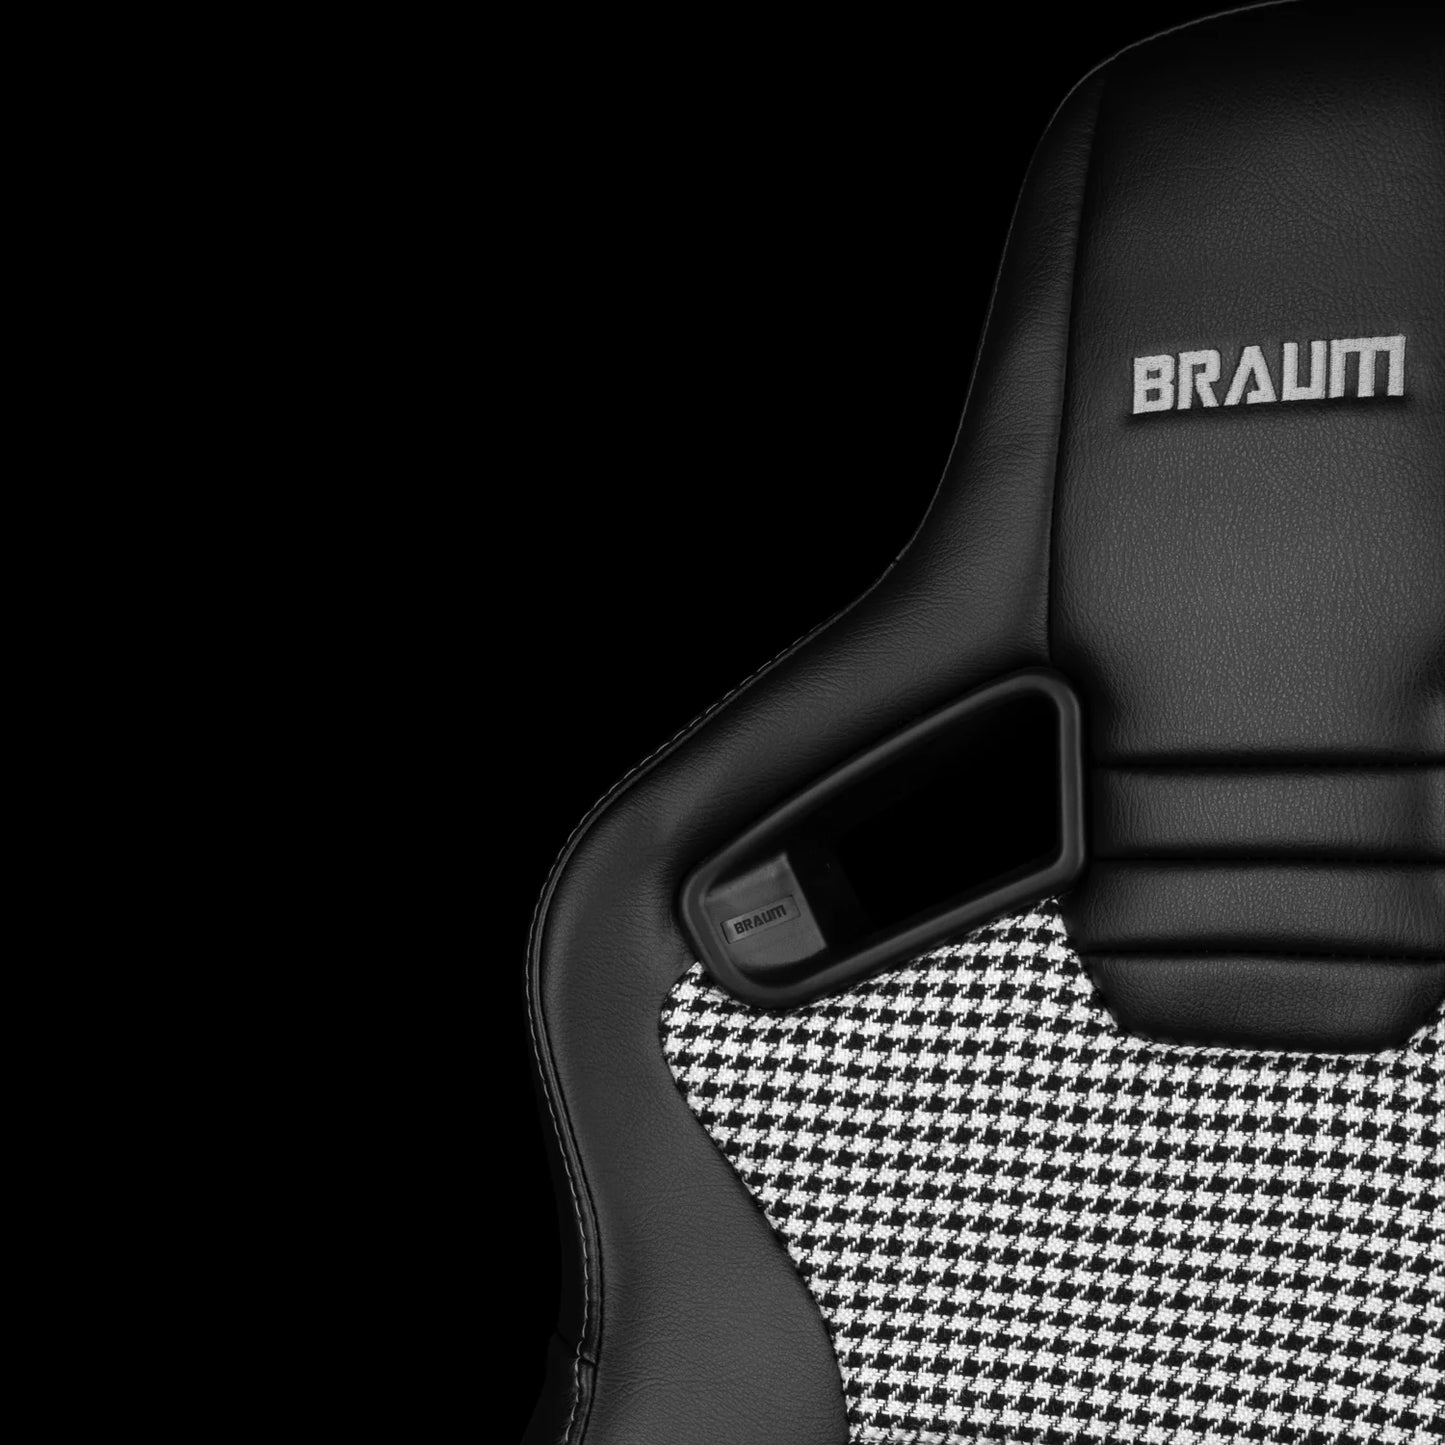 BRAUM ELITE V2 Series Sport Reclinable Seats (Black Leatherette | Houndstooth Fabric) – Priced Per Pair